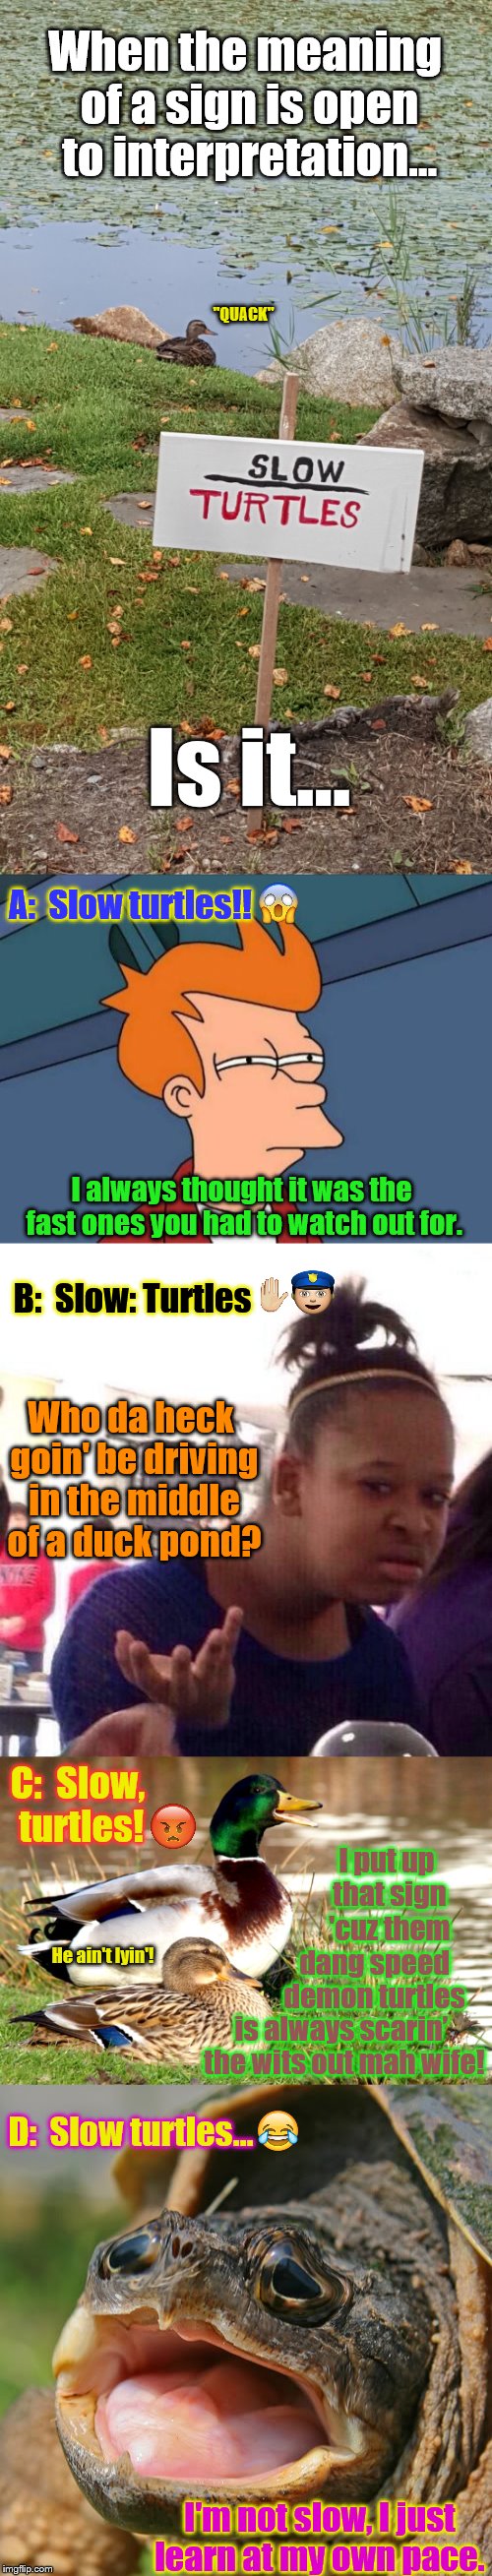 World’s first ‘choose-your-own-ending’ meme | When the meaning of a sign is open to interpretation…; "QUACK"; Is it... A:  Slow turtles!! I always thought it was the fast ones you had to watch out for. B:  Slow: Turtles; Who da heck goin' be driving in the middle of a duck pond? C:  Slow, turtles! I put up that sign 'cuz them; He ain't lyin'! dang speed demon turtles; is always scarin’ the wits out mah wife! D:  Slow turtles... I'm not slow, I just learn at my own pace. | image tagged in memes,funny,animals,phunny,funny signs,funny animals | made w/ Imgflip meme maker